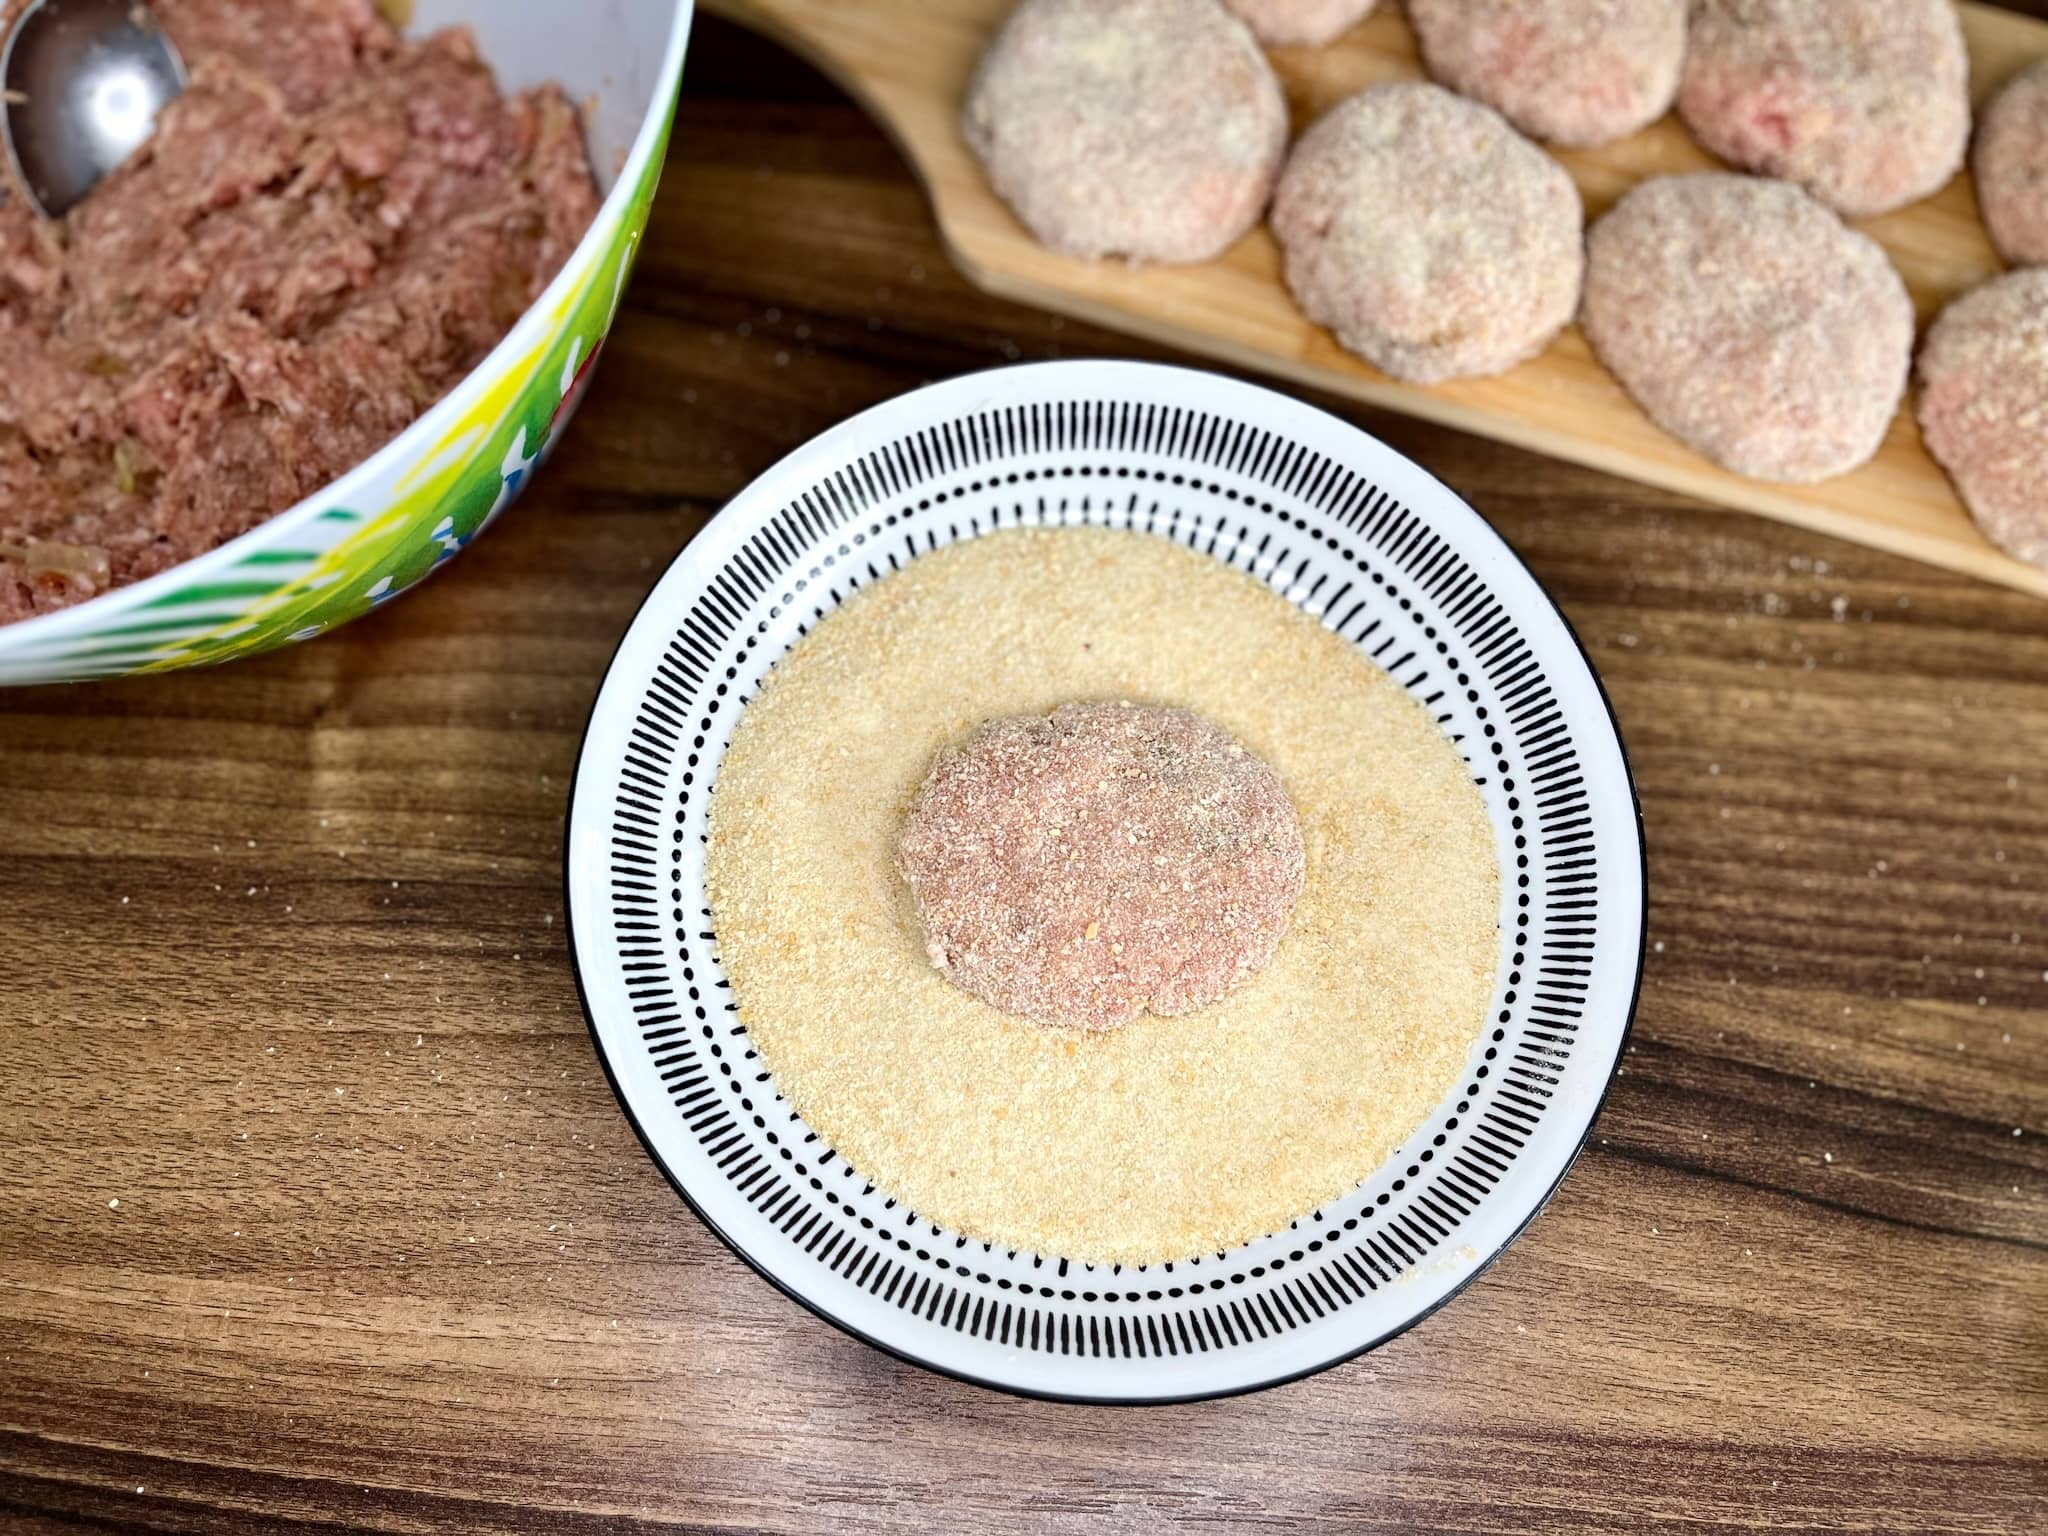 Nicely coated portion of meat mixture in a breadcrumbs